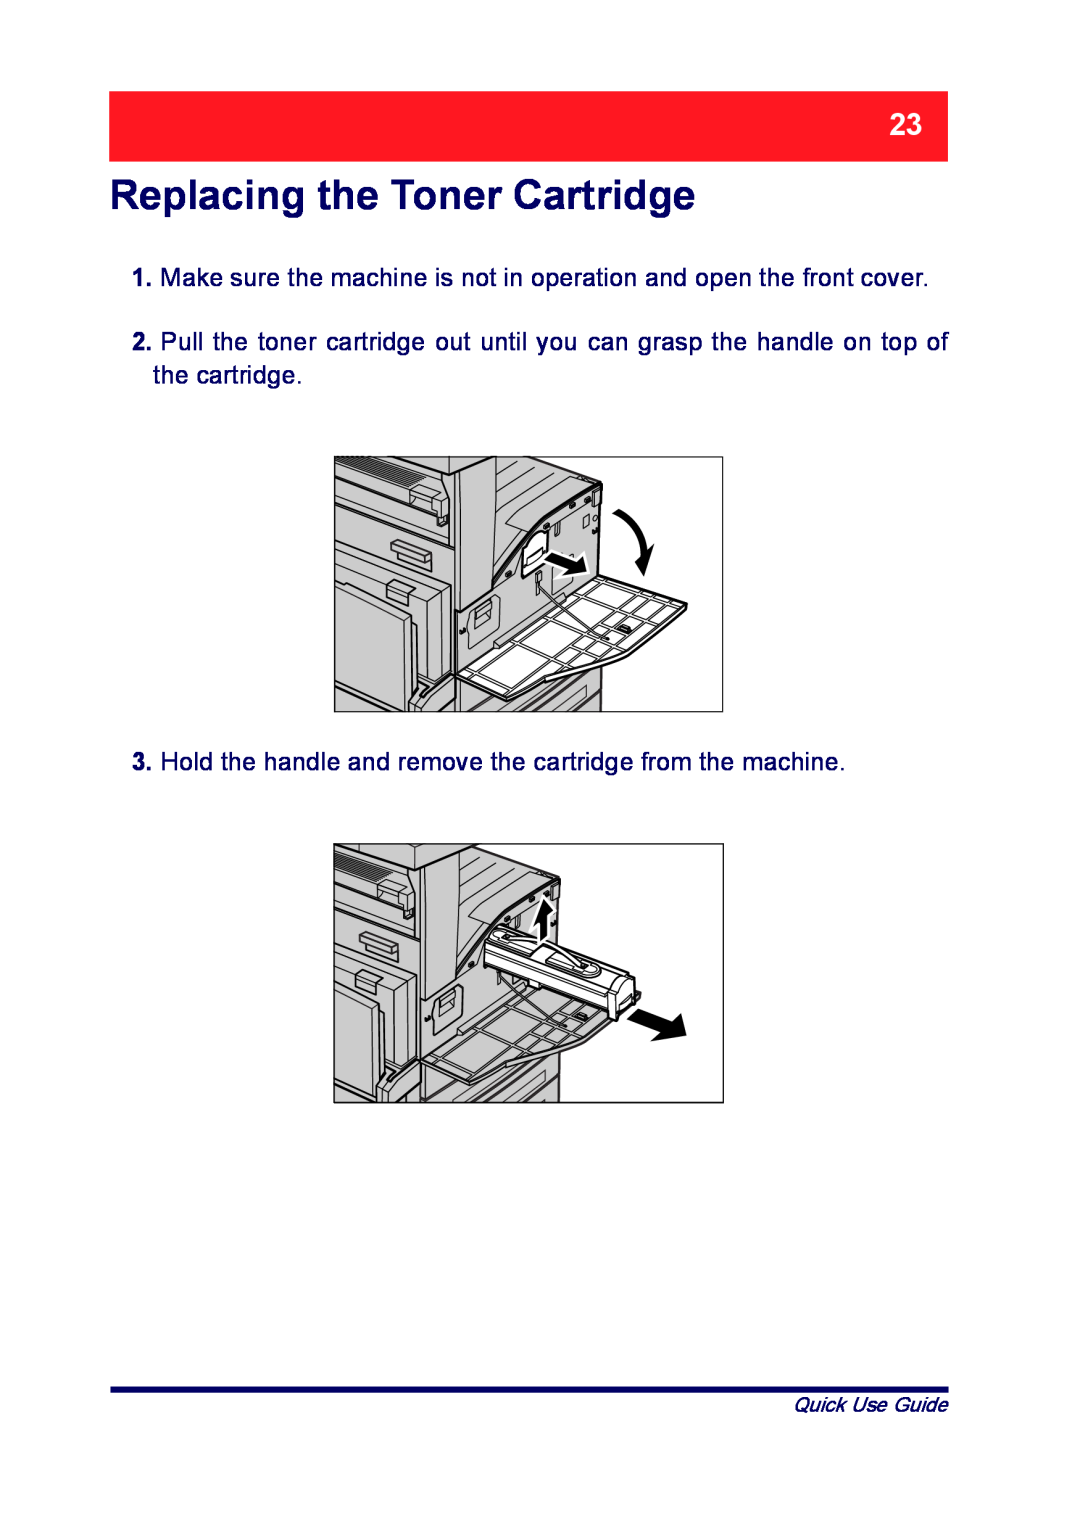 Xerox ME3612E4-1 manual Replacing the Toner Cartridge, Make sure the machine is not in operation and open the front cover 